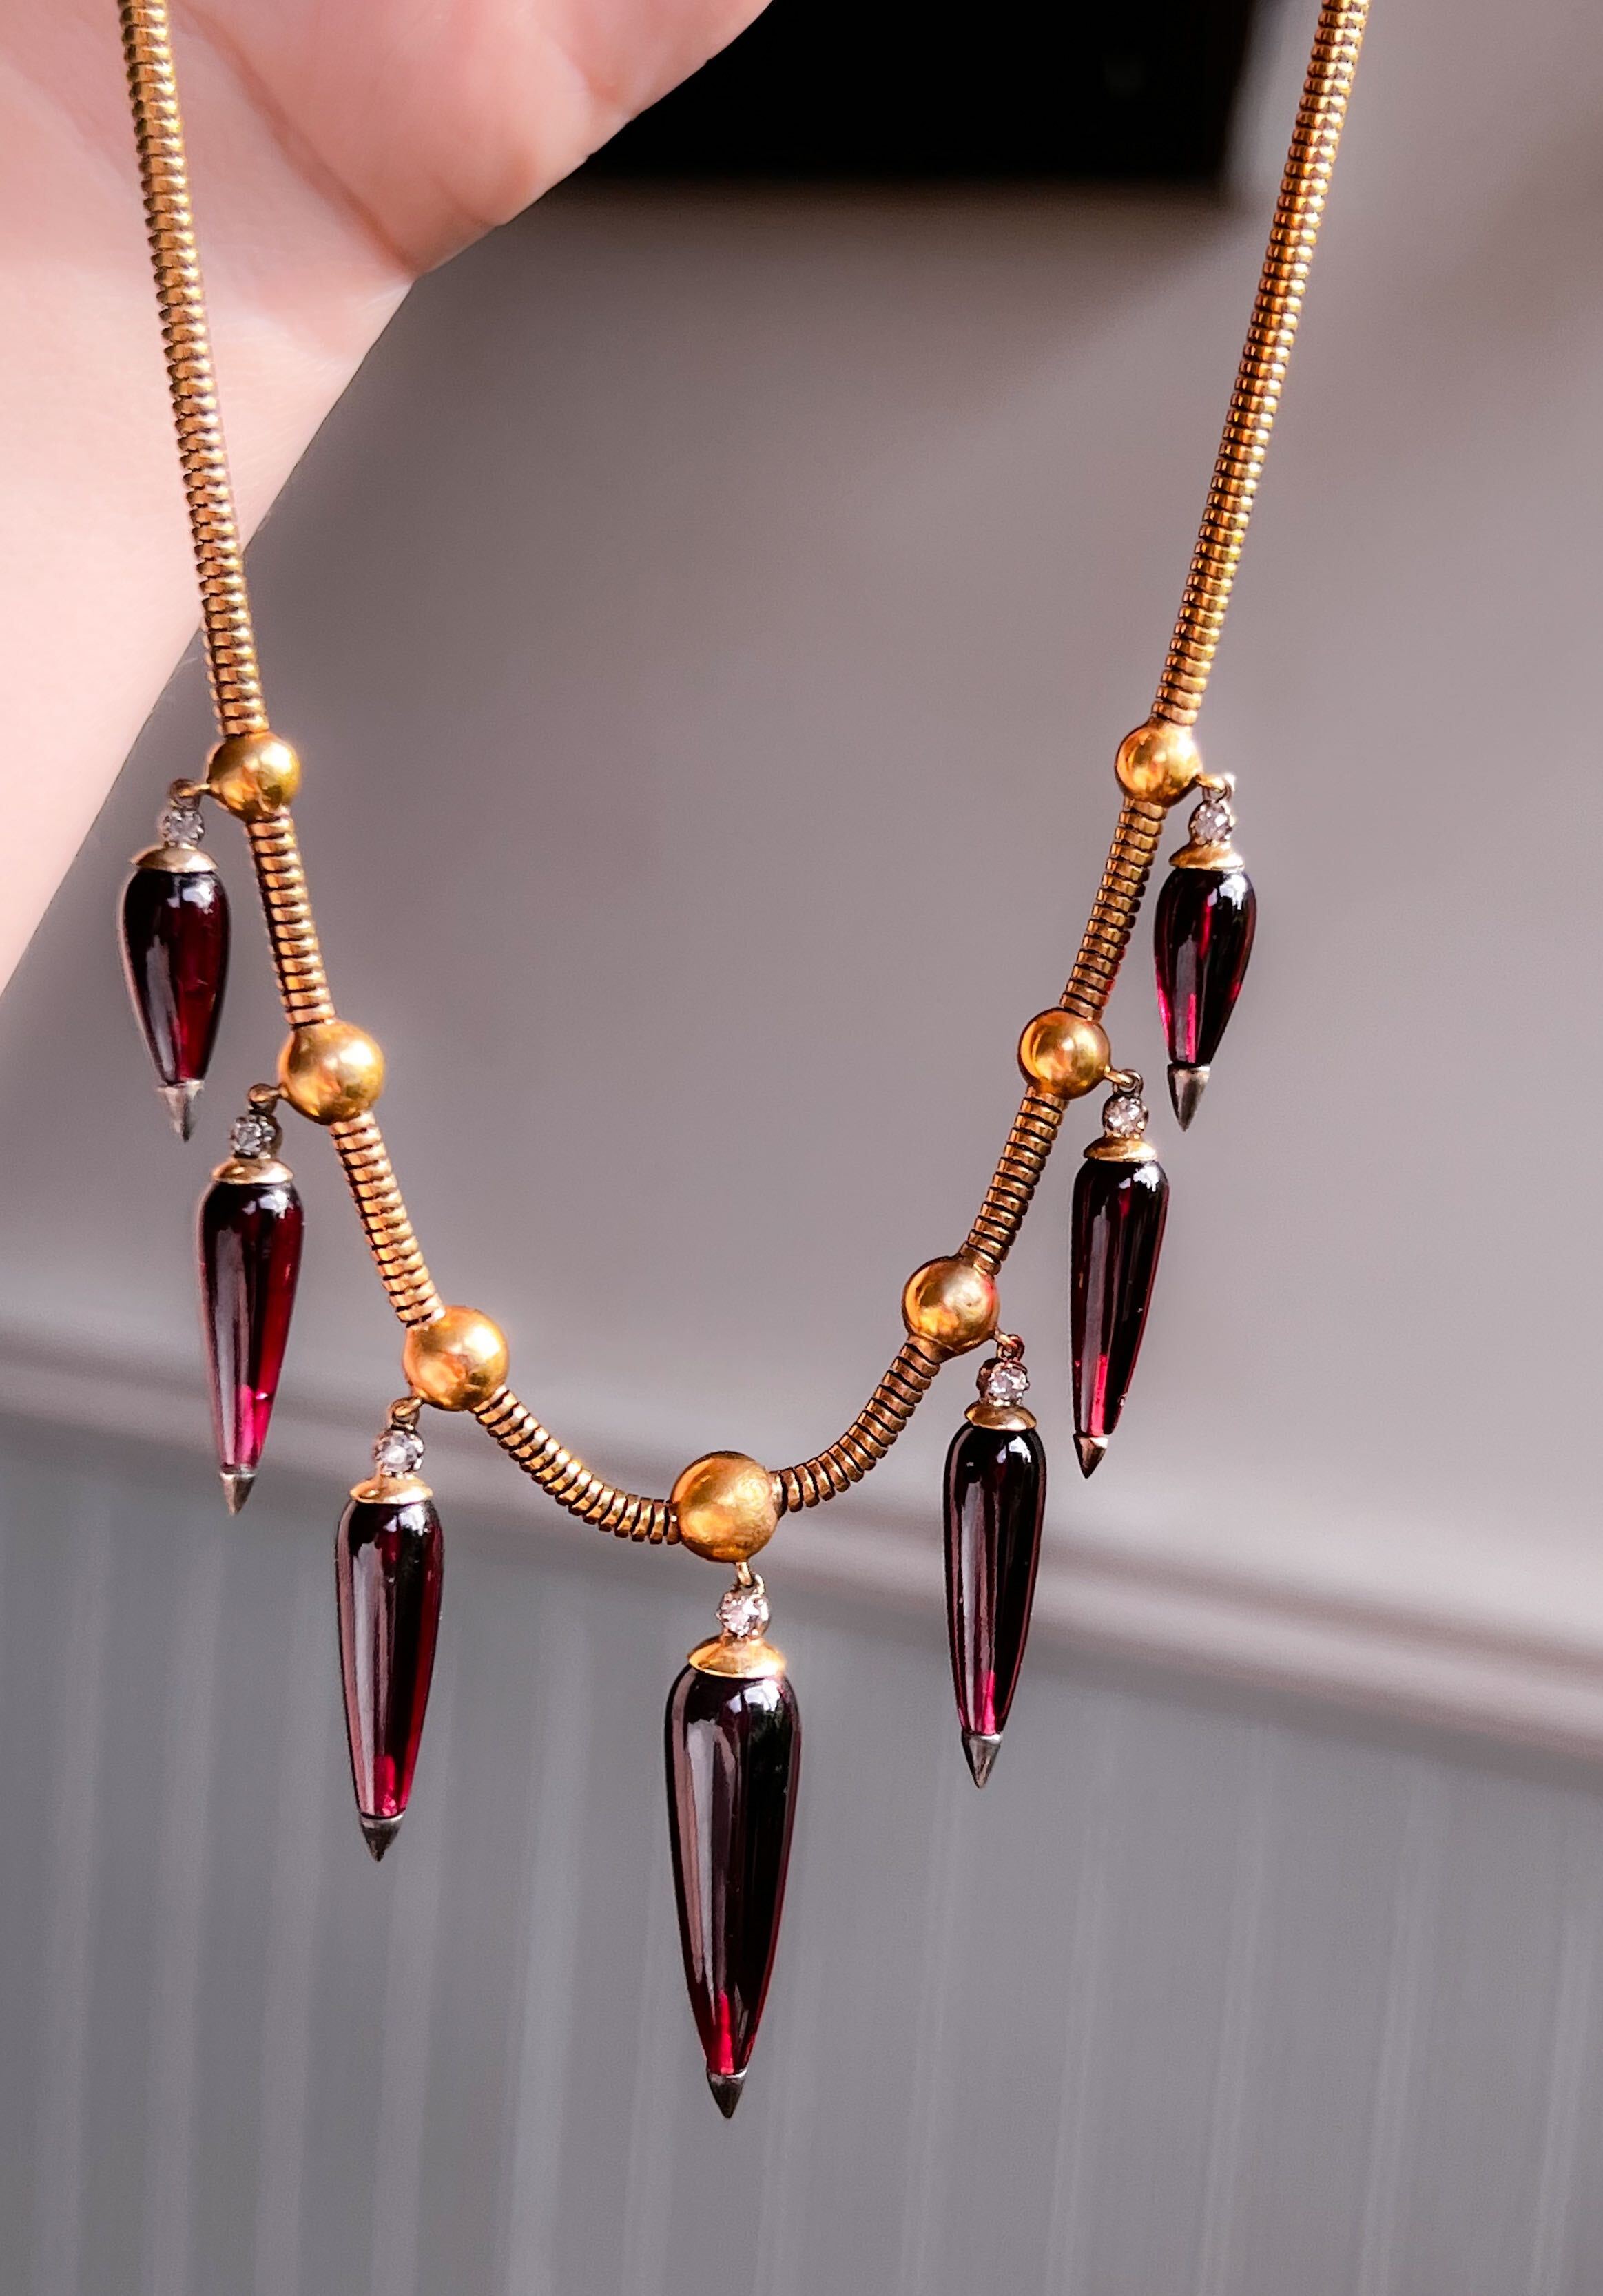 Once-In-A-Lifetime Archaeological Revival Garnet Drop Necklace